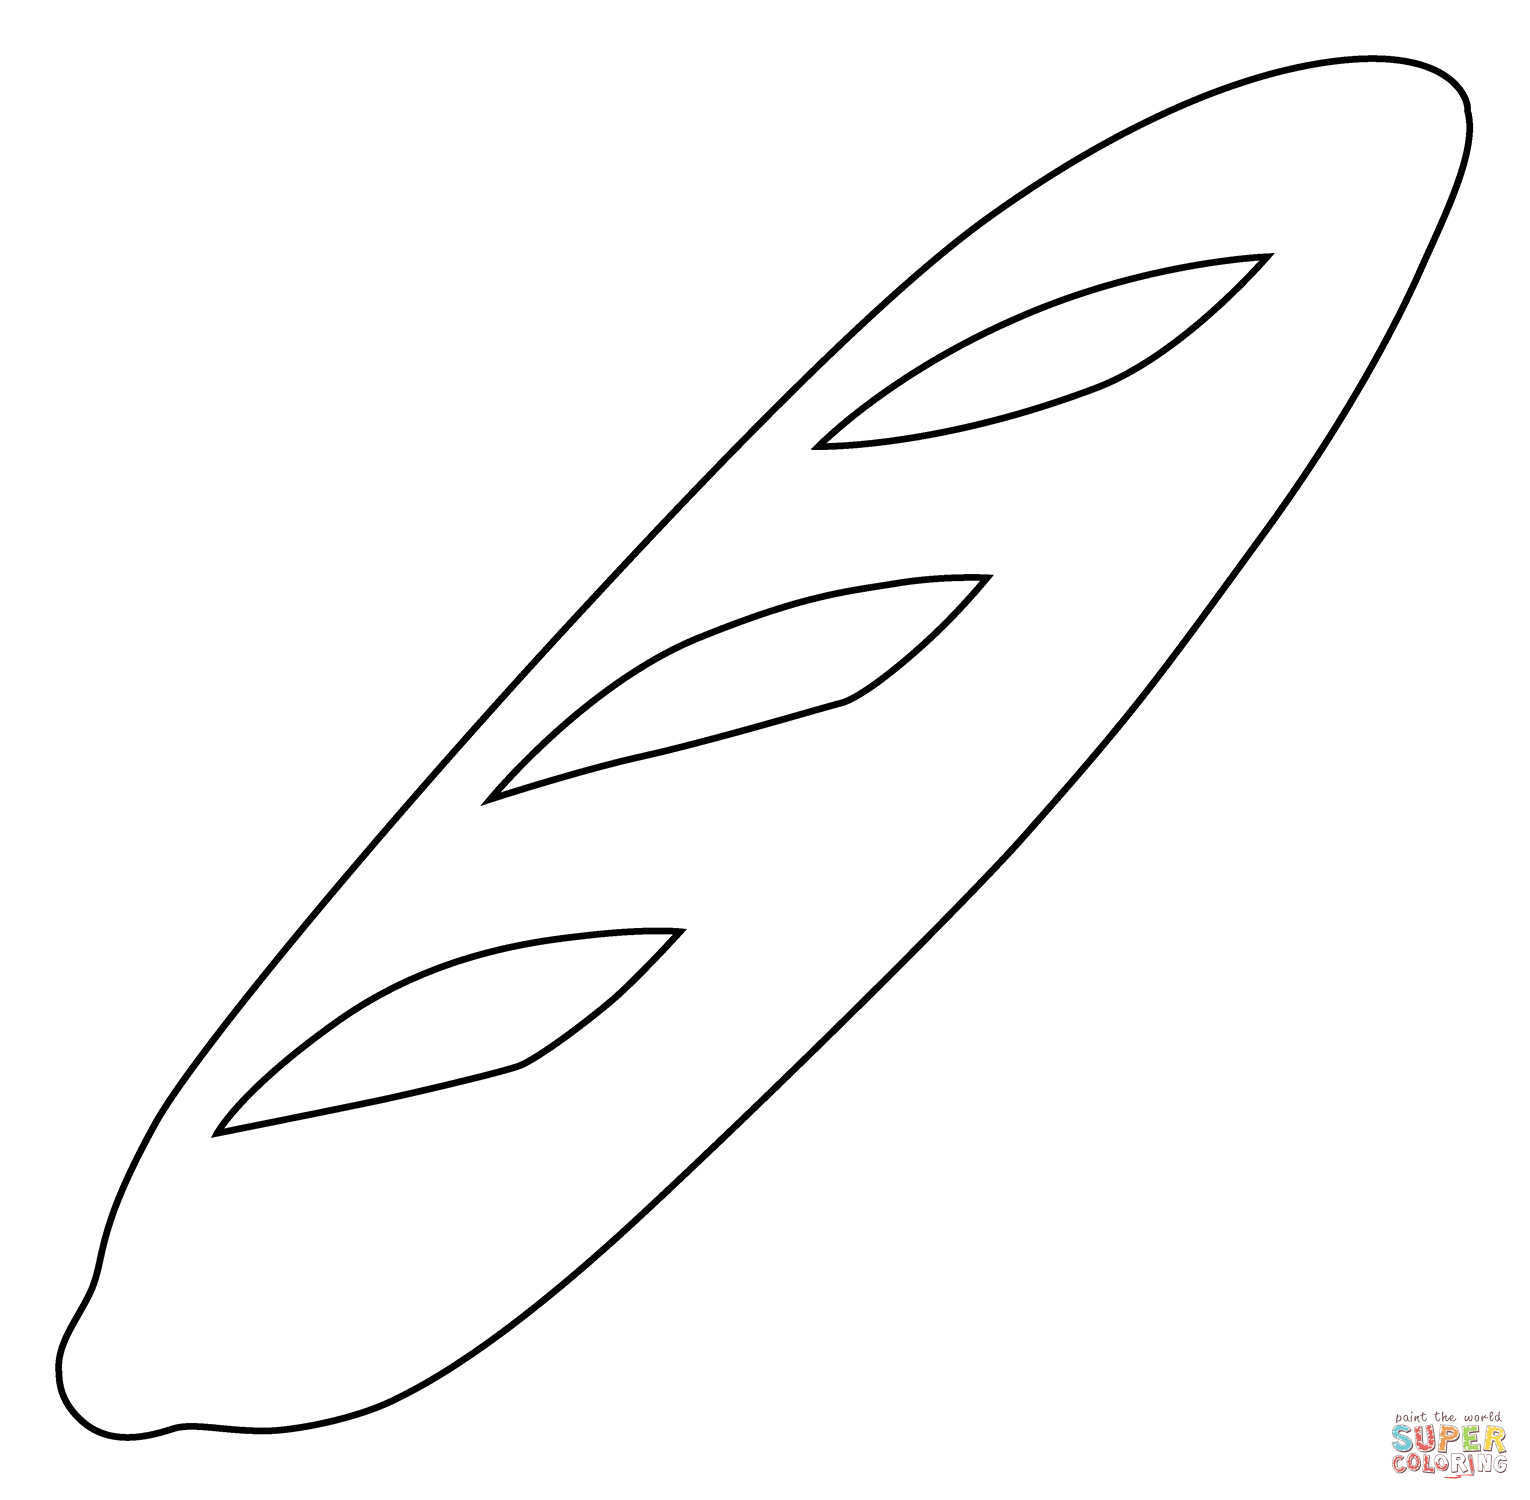 Baguette bread emoji coloring page free printable coloring pages